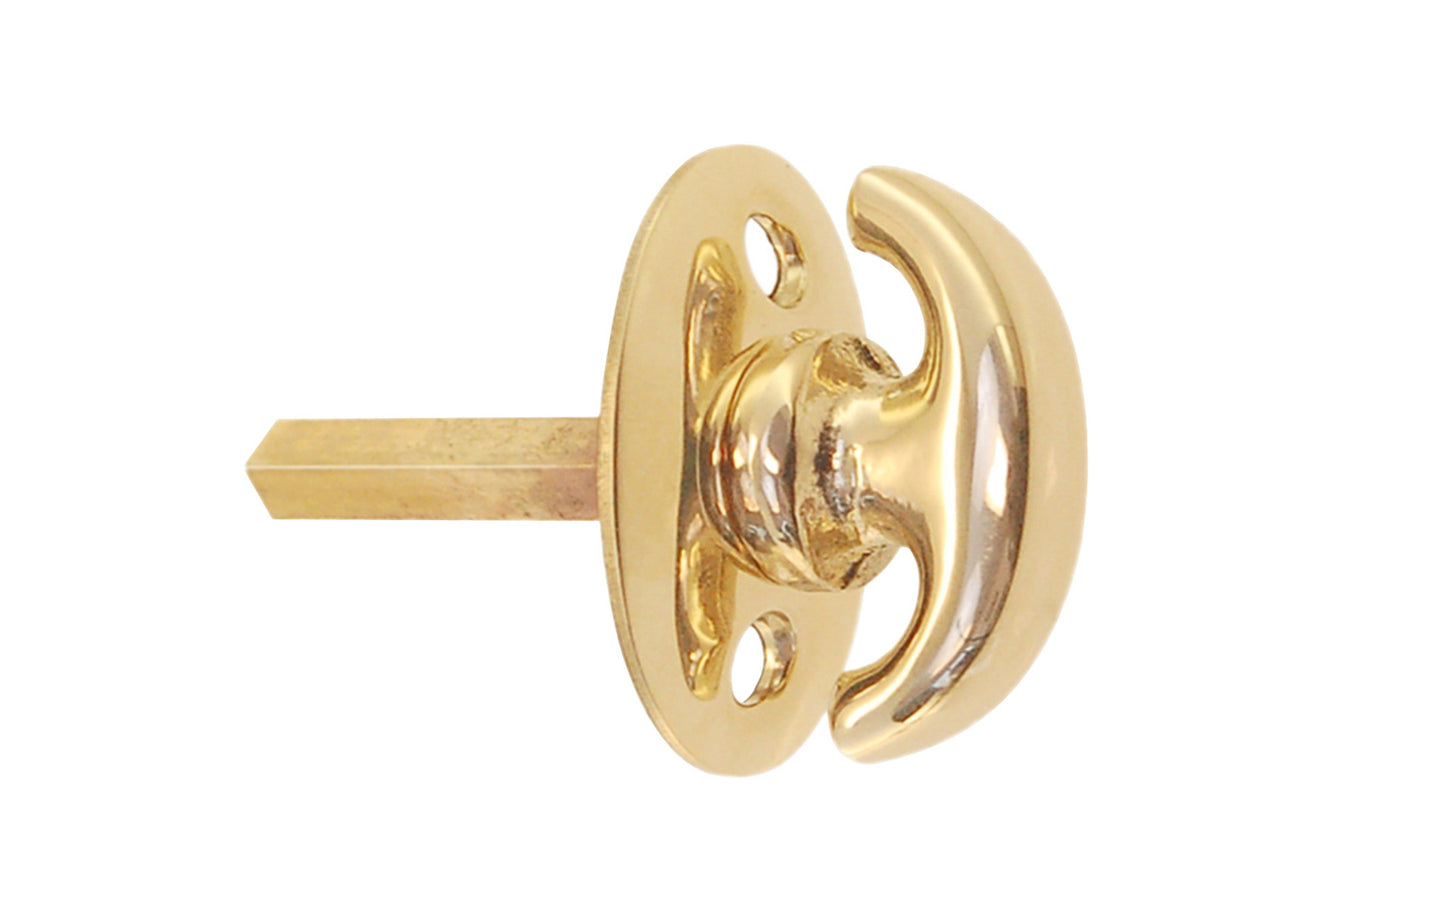 An old-style Classic Solid Brass crescent thumbturn for locking doors with a smaller oval plate. Used with mortise locks, deadbolts, night-locks, catches. Made of solid brass material. 3/16" thick shaft. Unlacquered brass (will patina naturally)